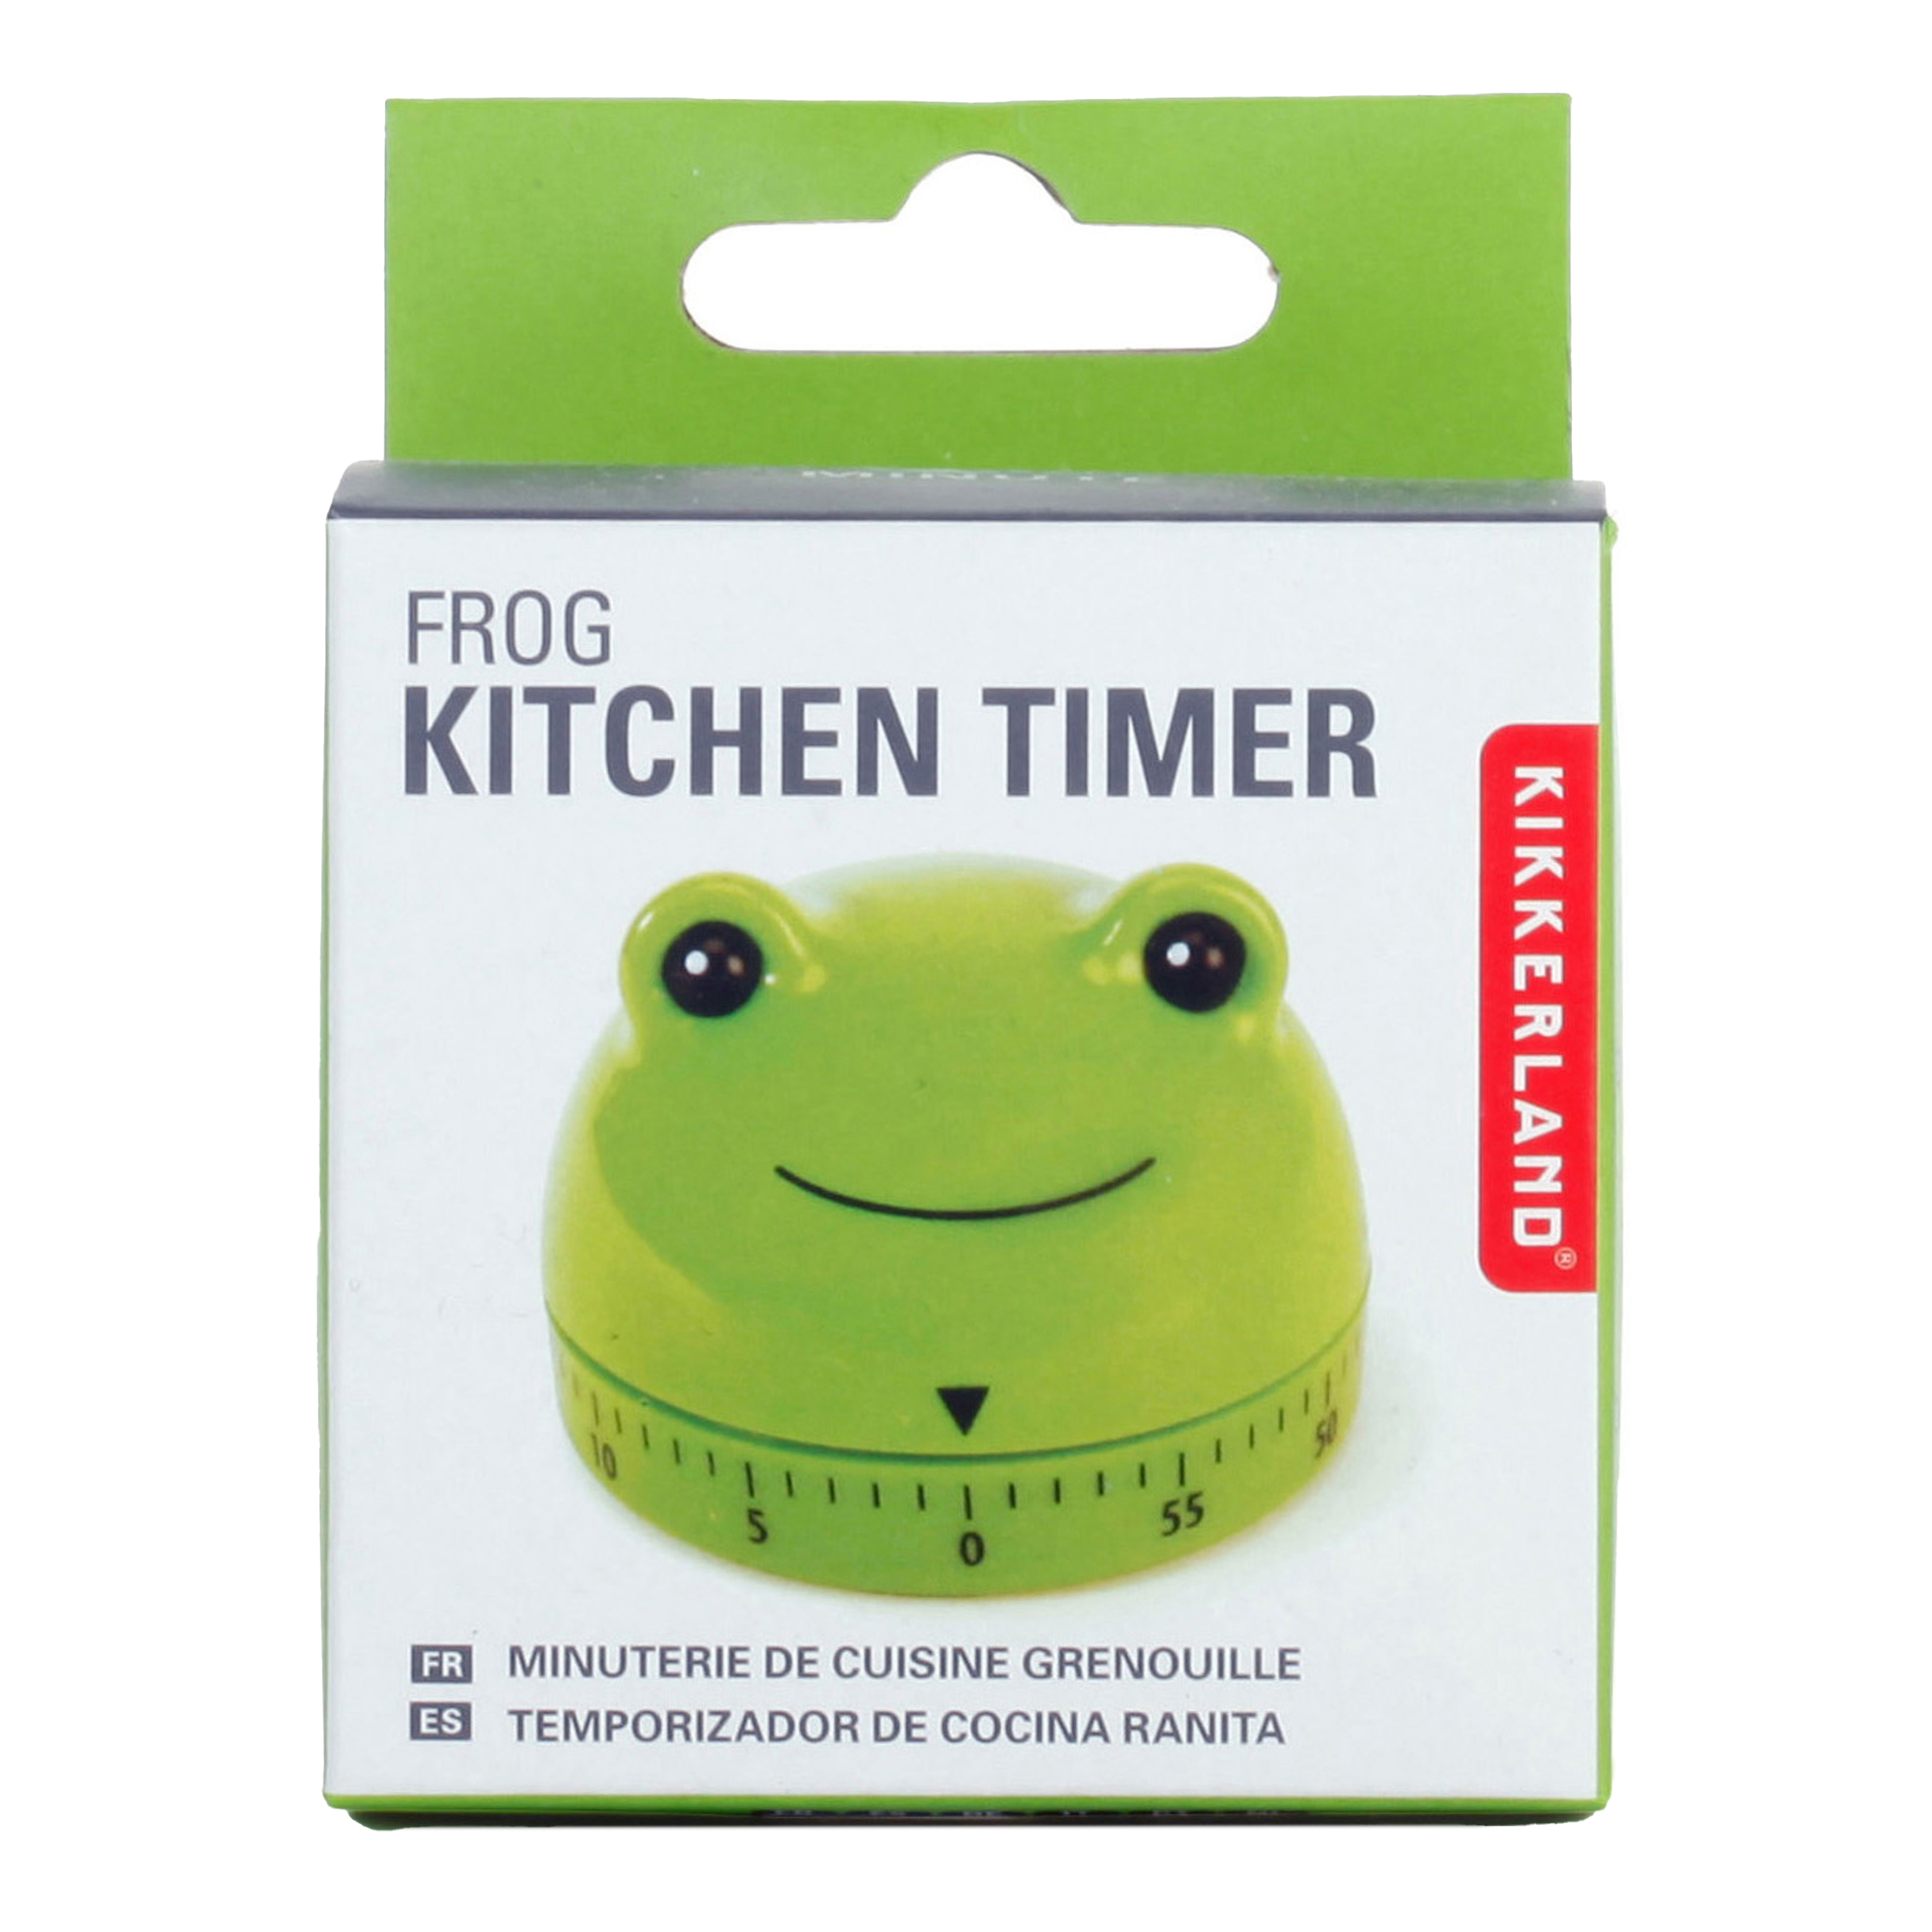 Best Kitchen Timers - A Very Cozy Home